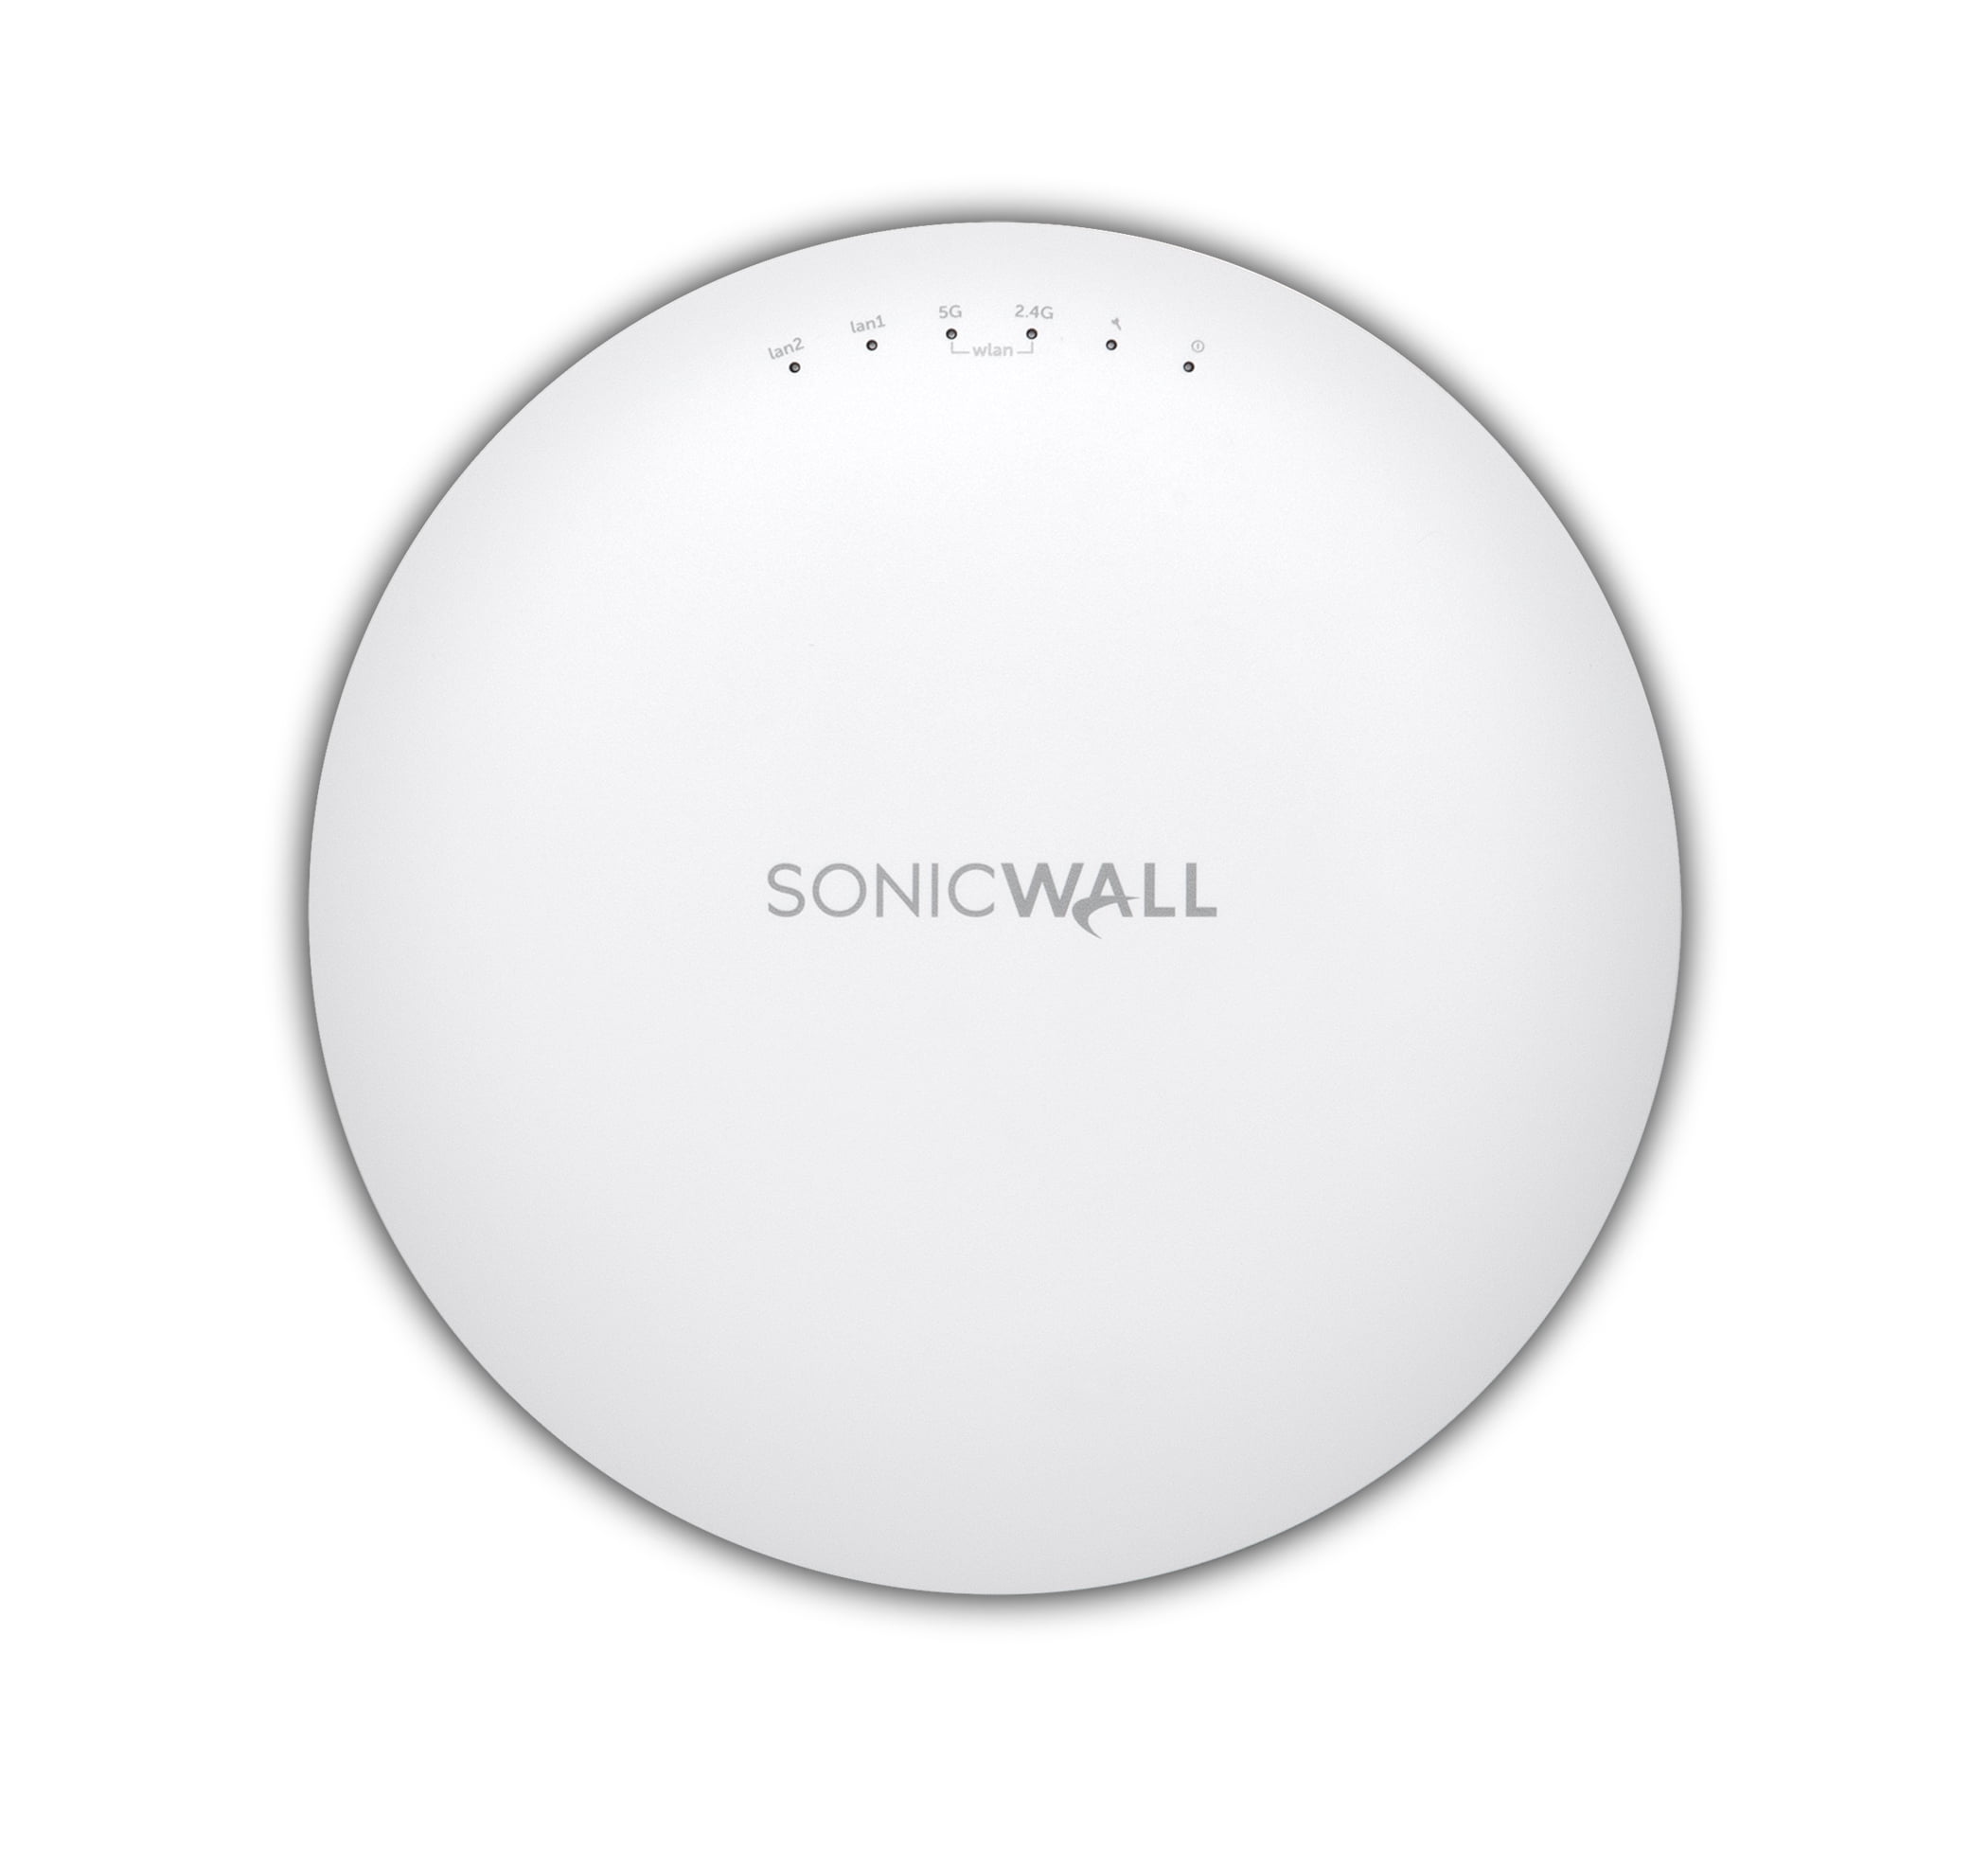 SonicWall Access Point SonicWave 432i